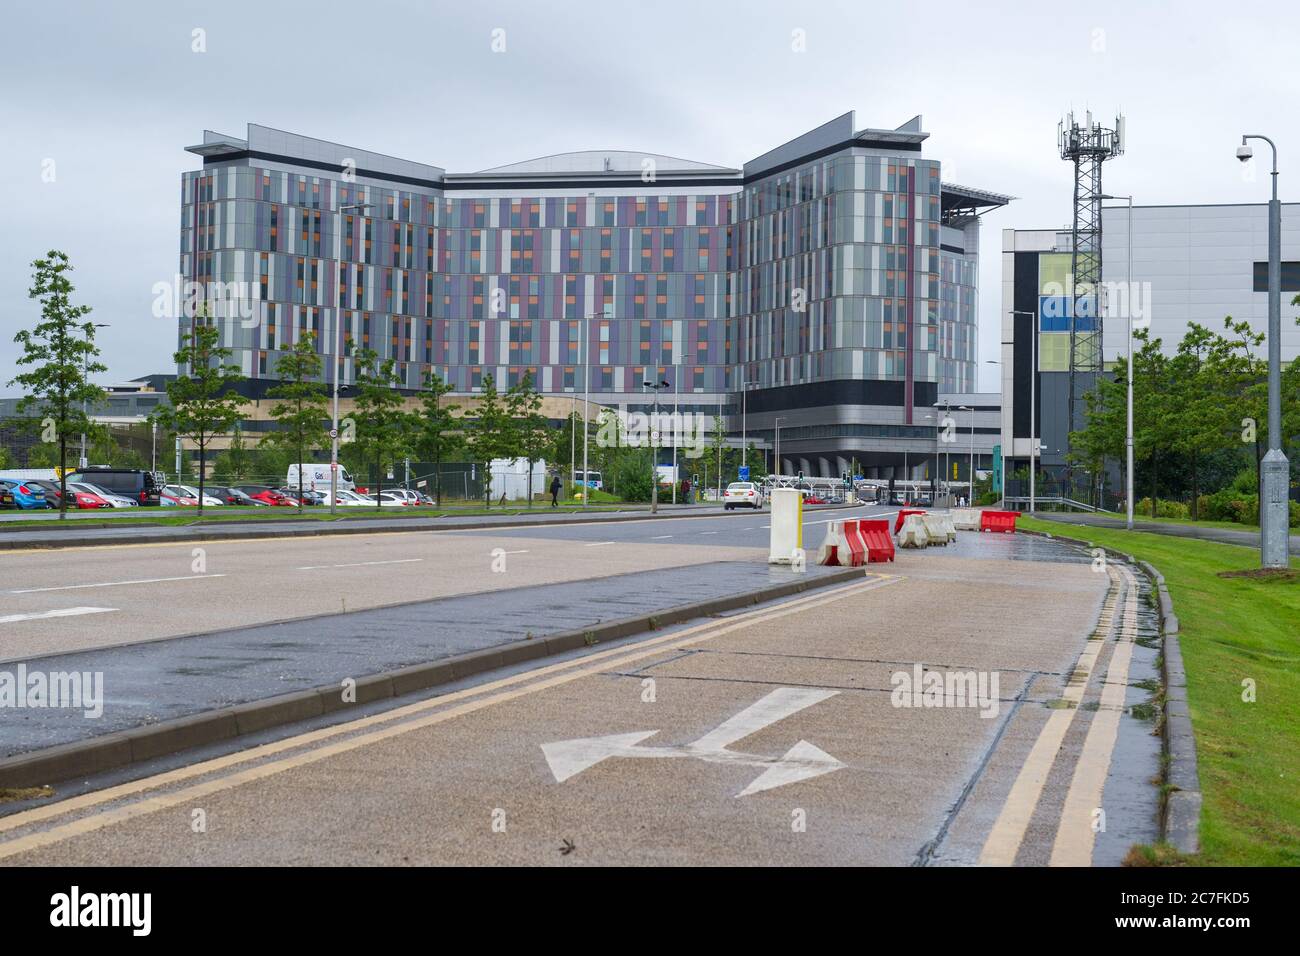 Glasgow, Scotland, UK. 17 July 2020 Pictured: Queen Elizabeth University Hospital (QEUH) run by NHS Greater Glasgow and Clyde Health Board. Last month a government-commissioned independent review found that vulnerable patients were placed at increased risk because of substandard water and ventilation systems at the hospital. But the review said there was no 'sound' evidence that patients died as a result. Credit: Colin Fisher/Alamy Live News Stock Photo